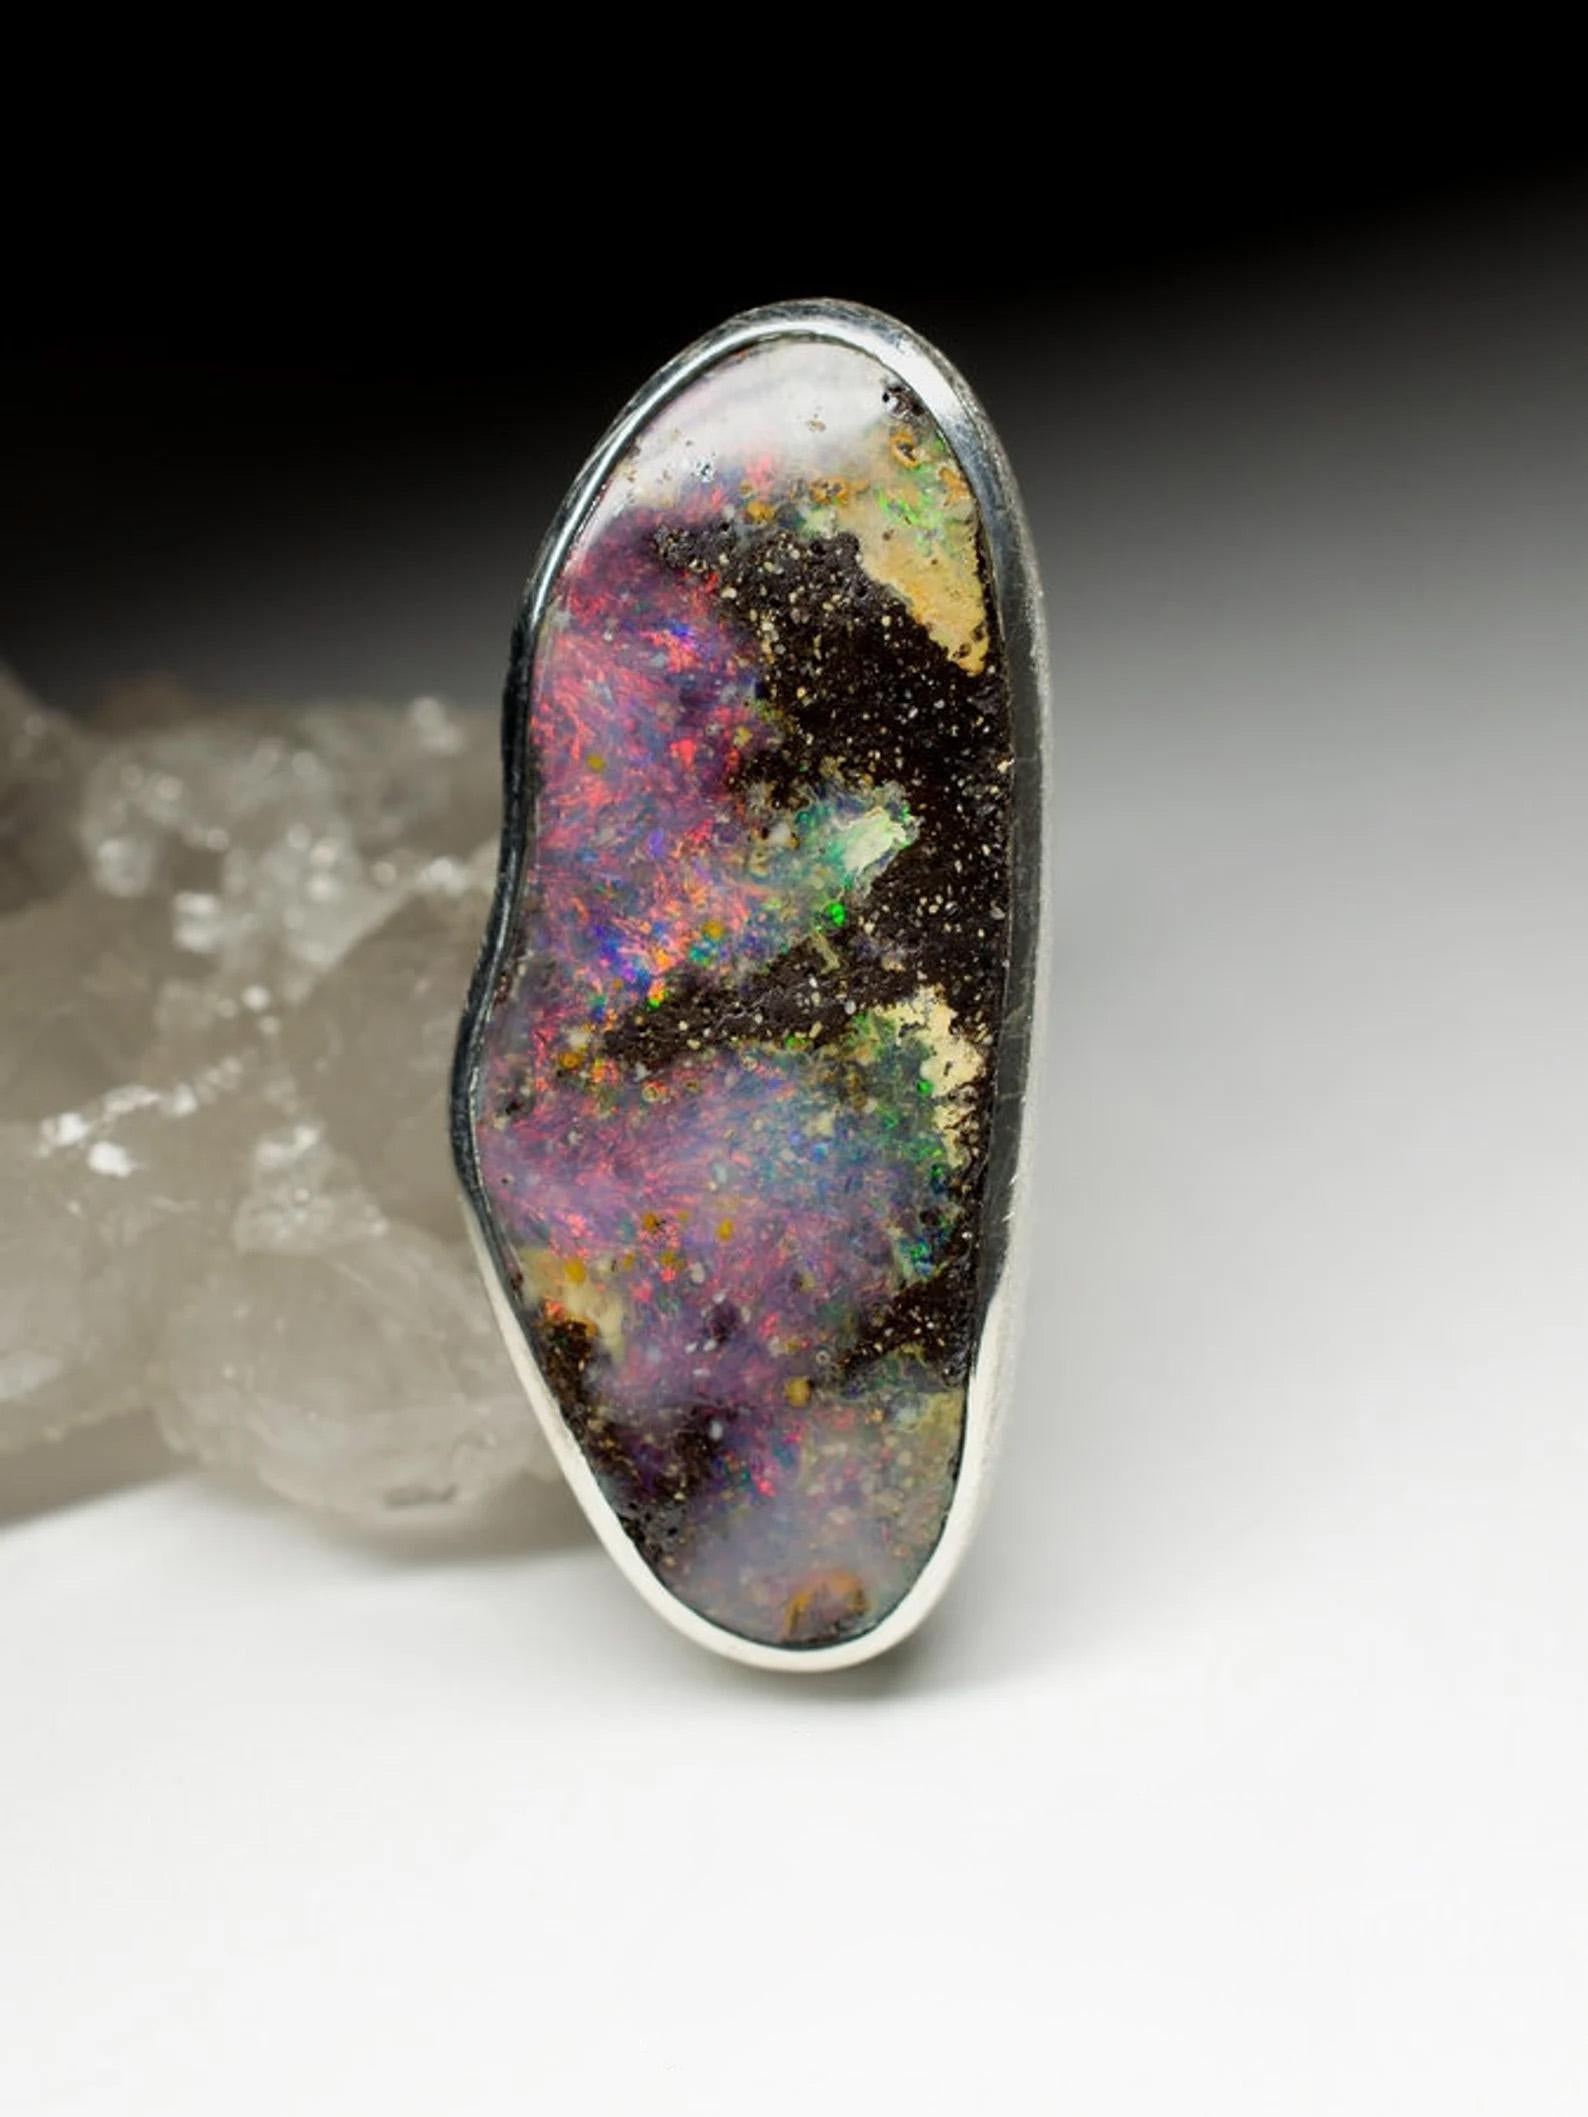 Artisan Large Boulder Opal Ring Natural Polychrome Space Dust Purple Pink Gemstone For Sale